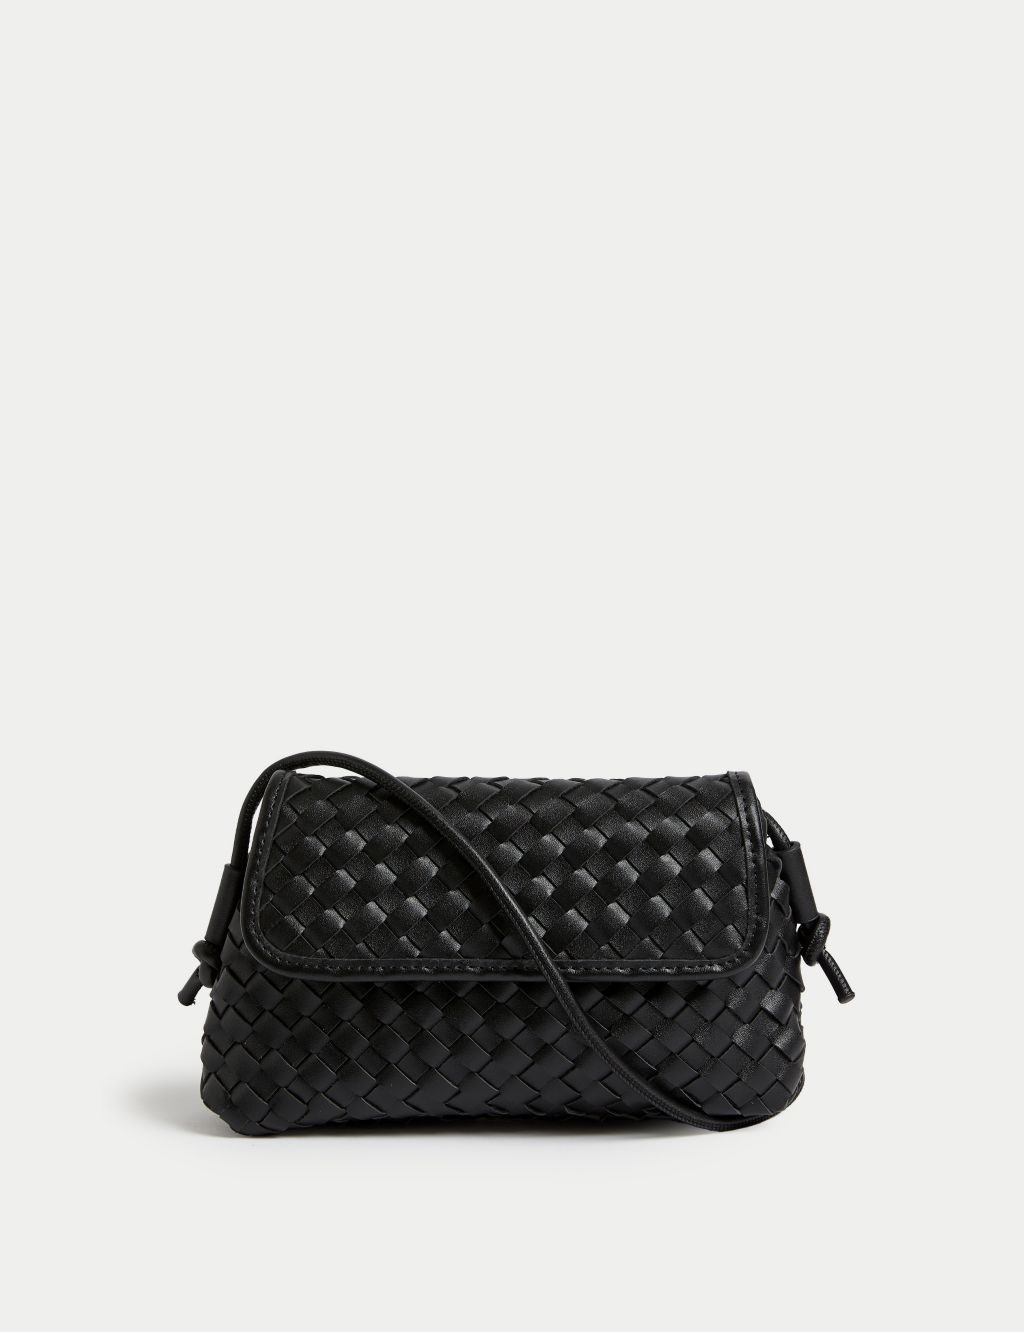 Faux Leather Woven Cross Body Bag image 2